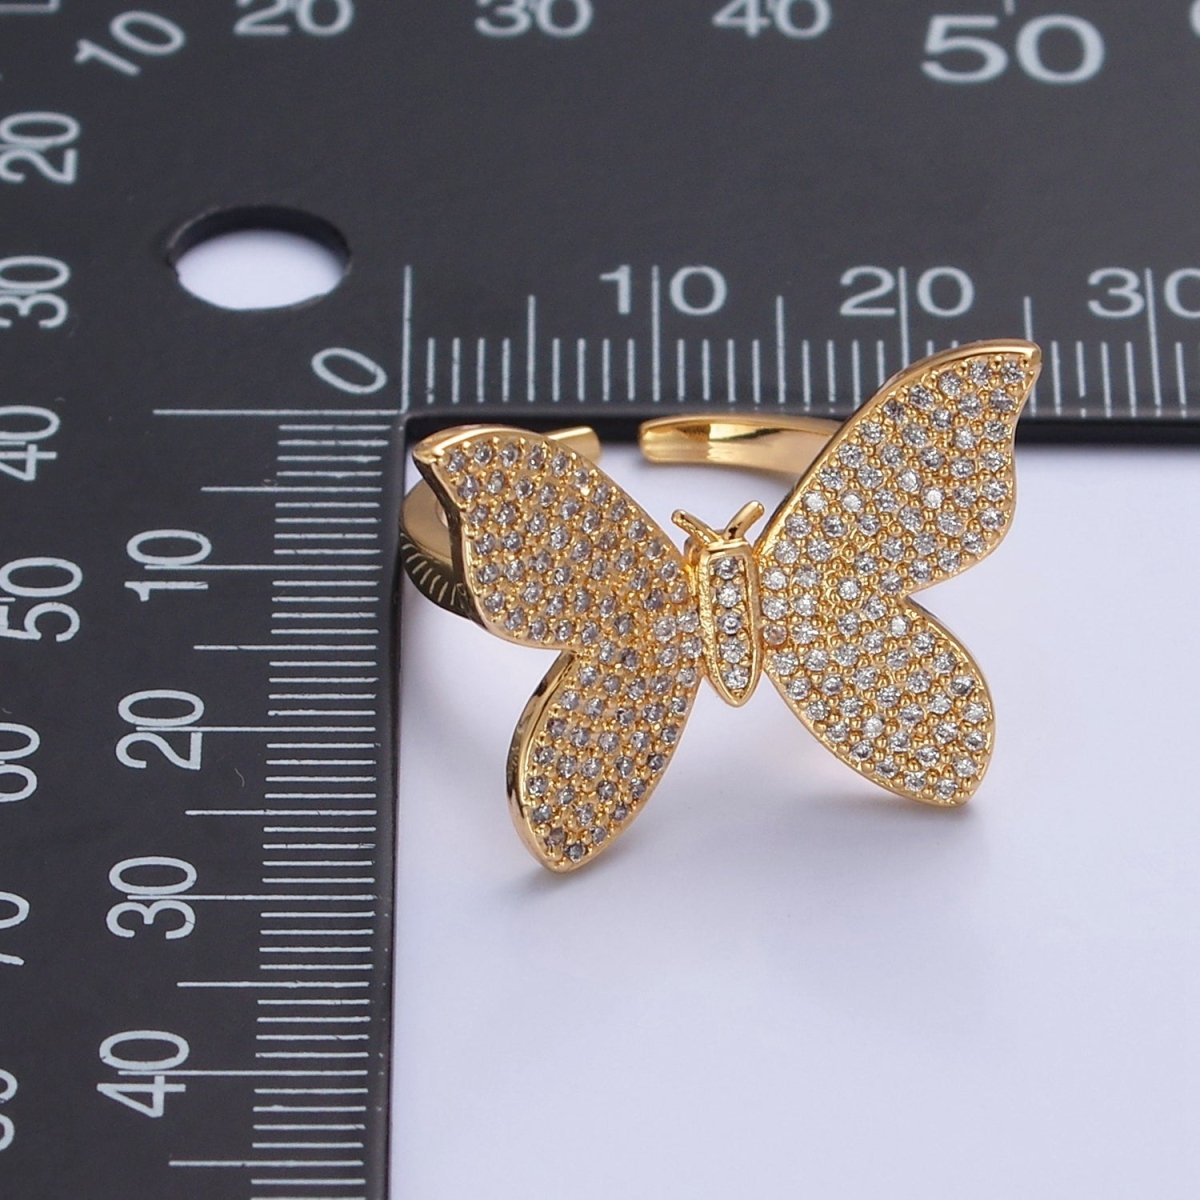 Statement Big Mariposa Ring Gold Pave Silver Butterfly Ring Open Adjustable Jewelry O-2229 O-2230 - DLUXCA